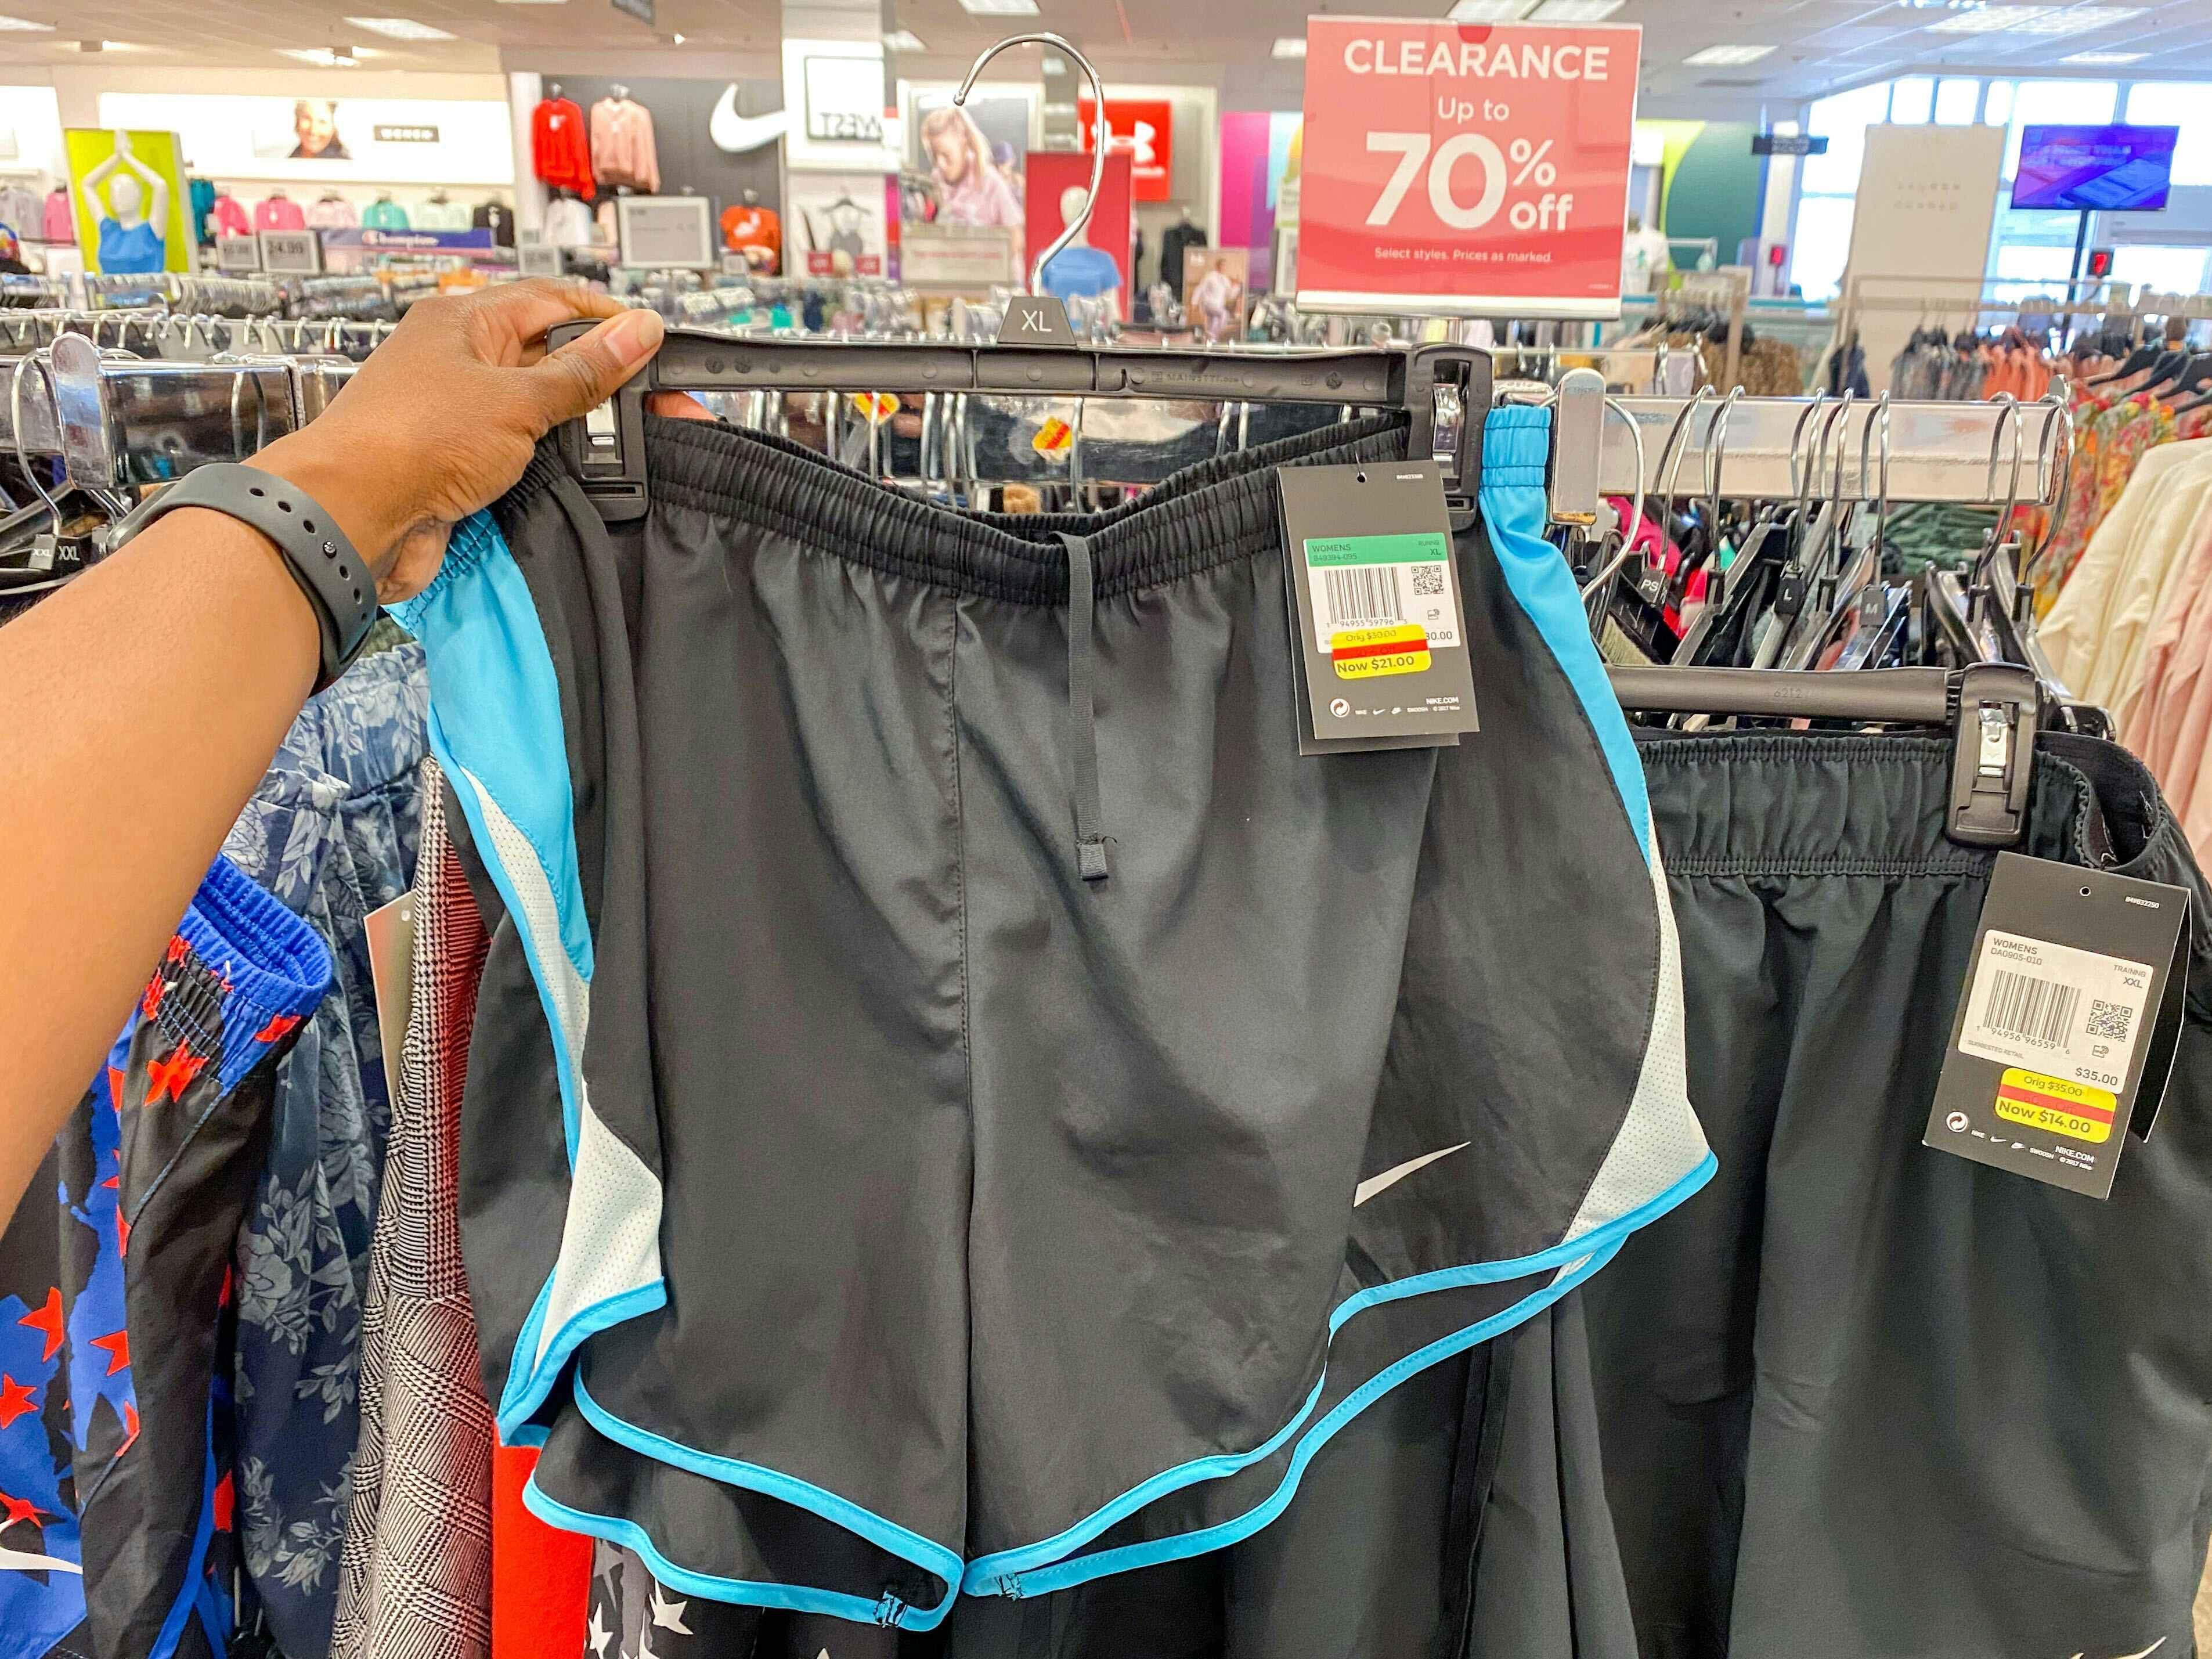 Shopping at Kohl's: Tips, Tricks, & Coupon Codes - Fabulessly Frugal